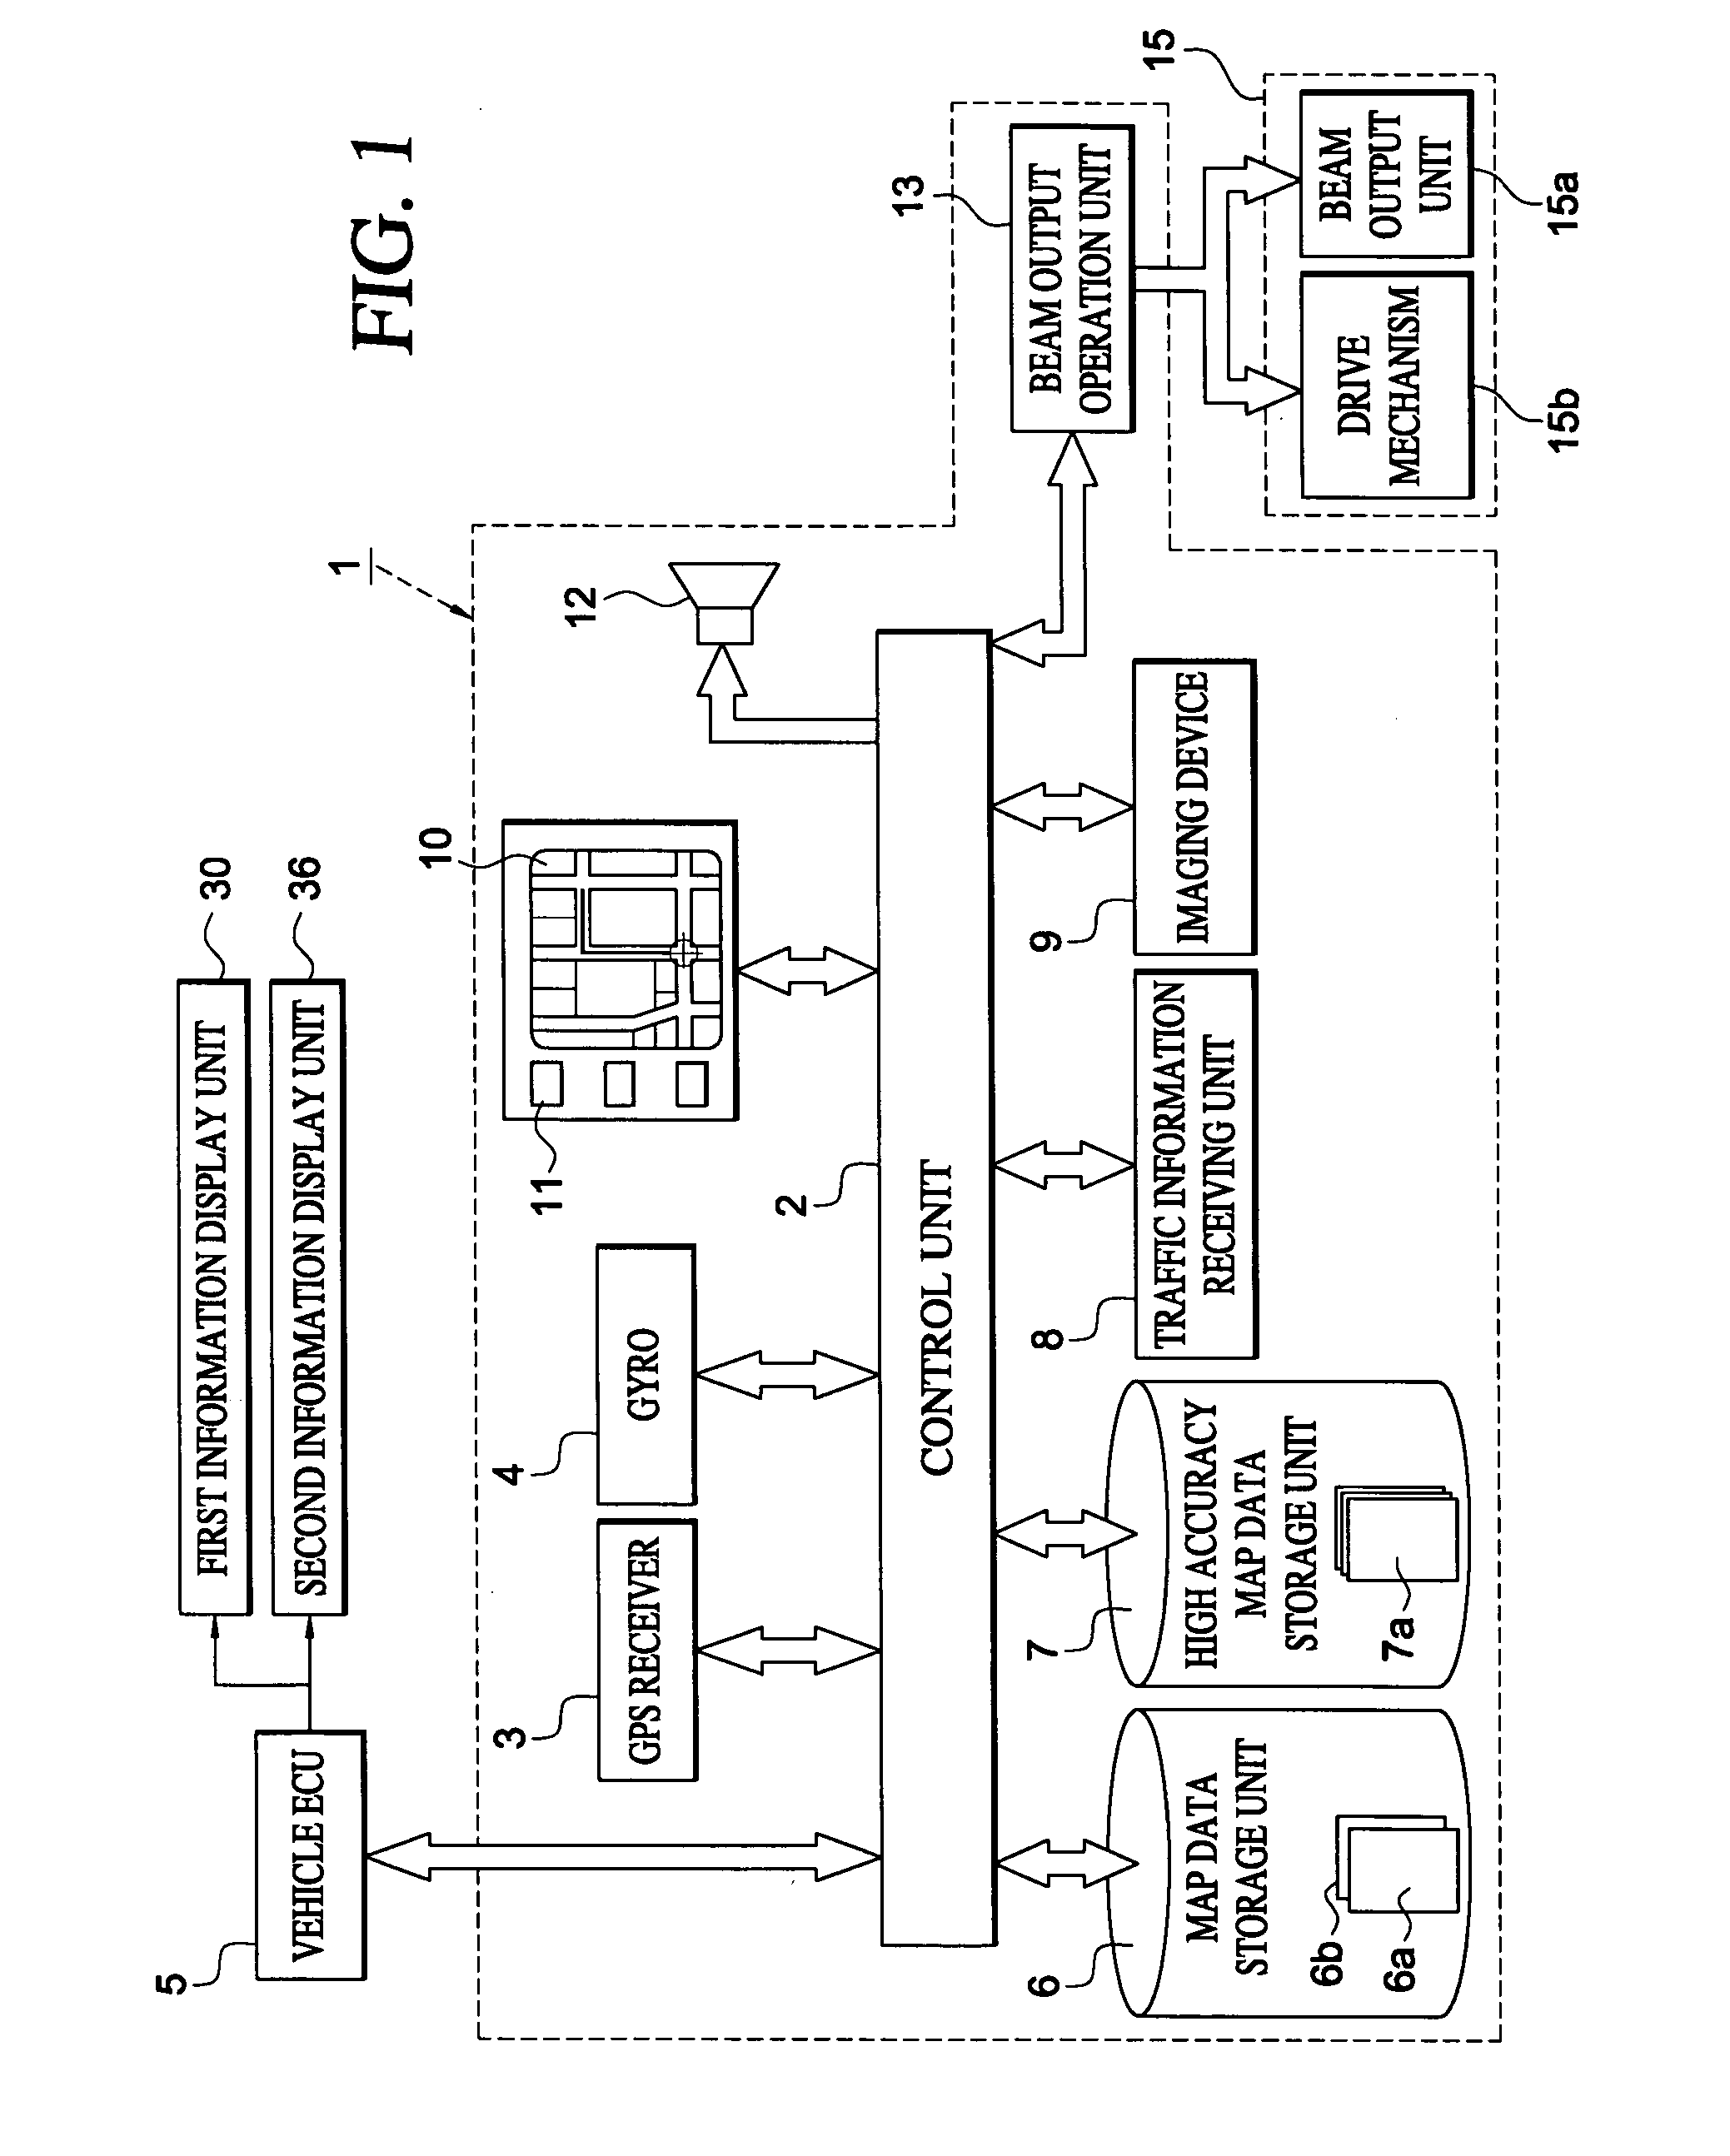 Driving support method and device